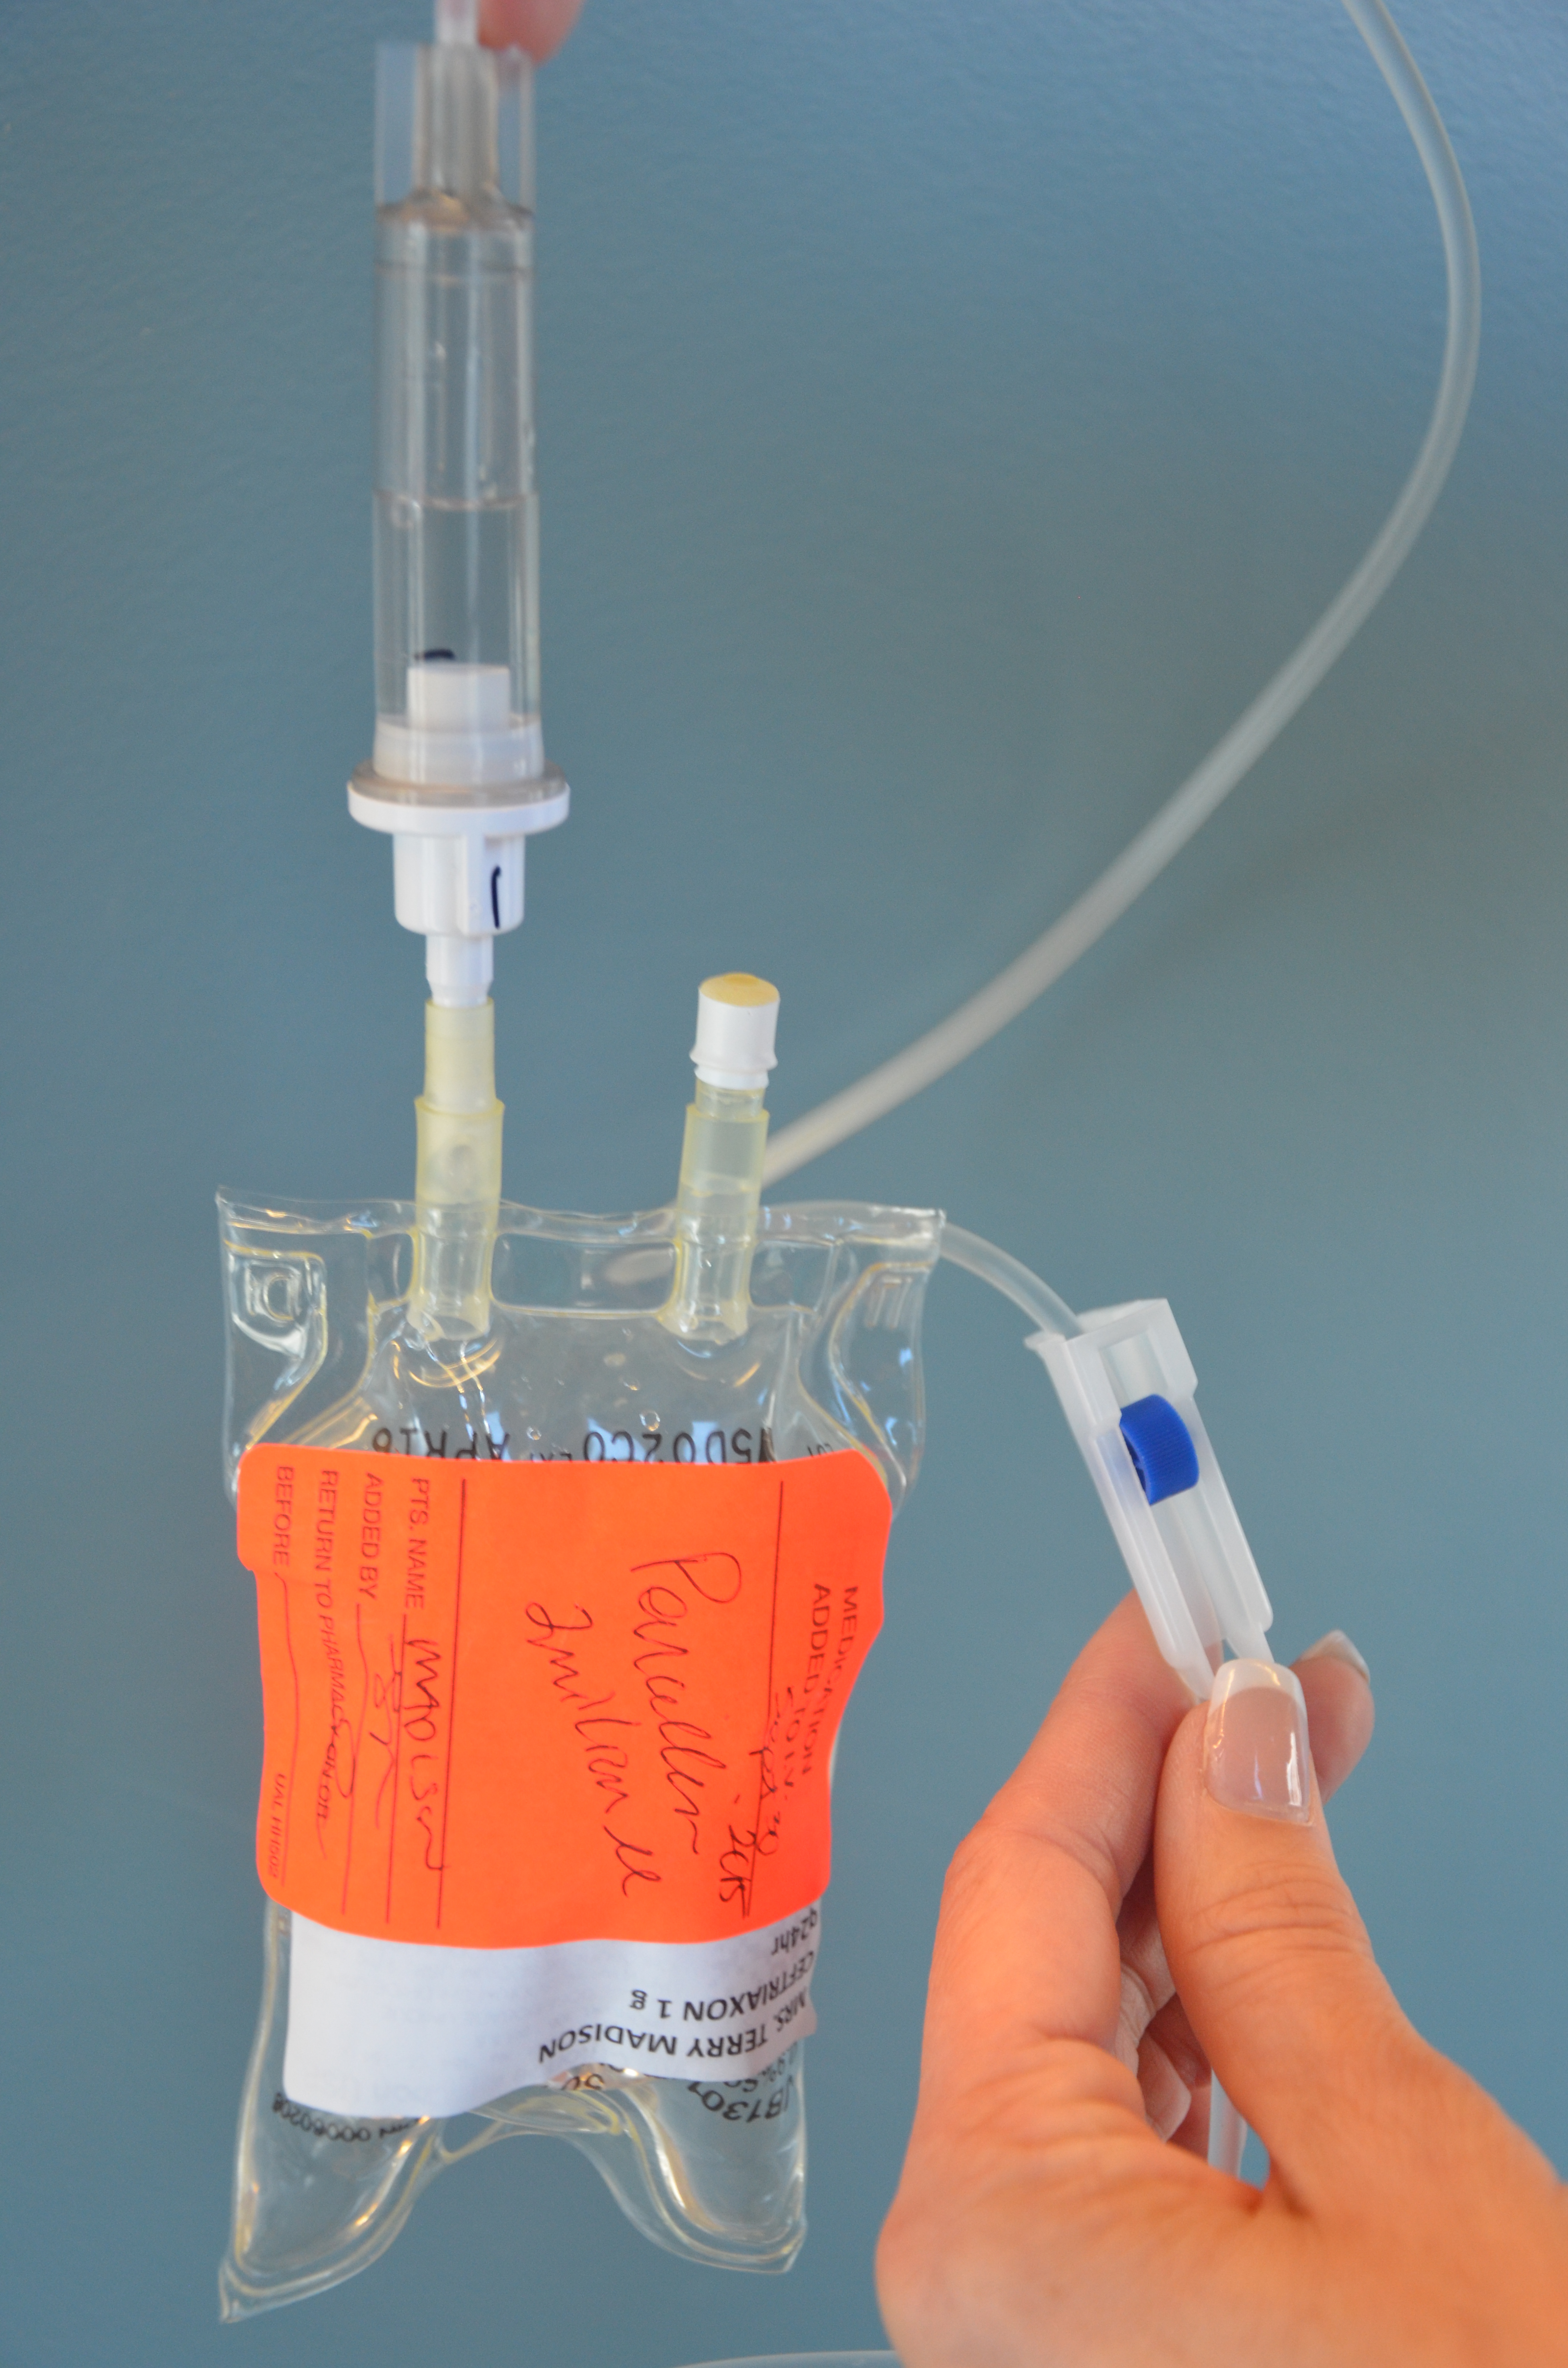 Piggyback system for intravenous therapy used in the hospital of the